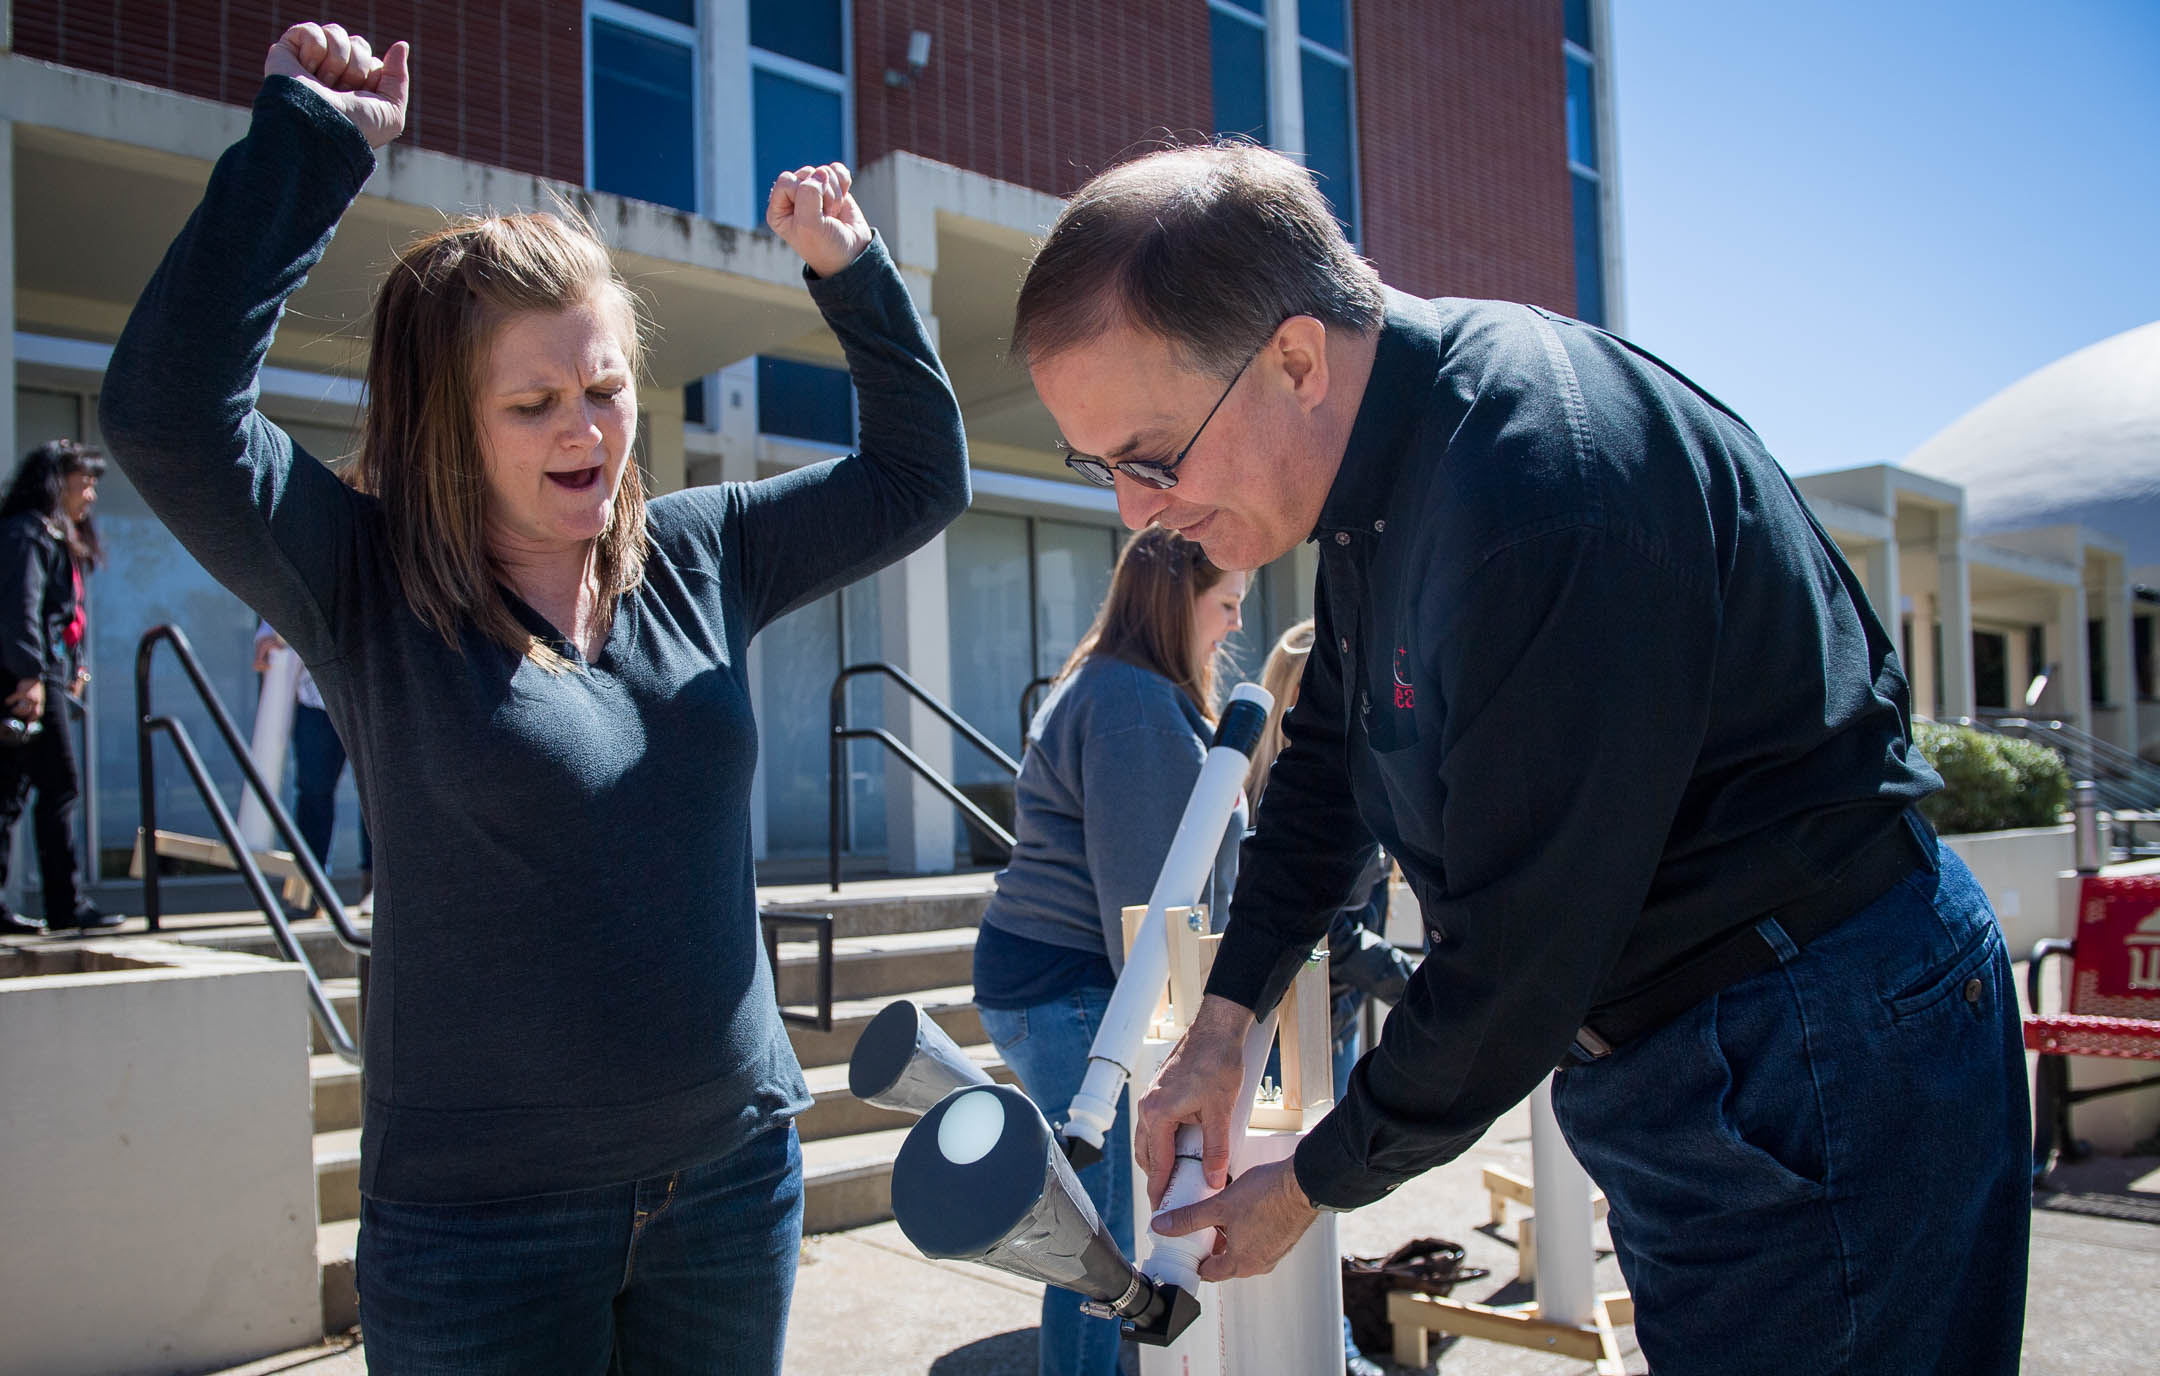 April Craft, an 8th-grade science teacher at James E. Bazzell Middle School (Allen County), celebrates as Rico Tyler, a master teacher in Western Kentucky University's SKyTeach program, helps set up her homemade telescope to view the sun during a solar science workshop at WKU. The workshop was designed to help teachers use the Aug. 21 total solar eclipse as a teaching opportunity. Photo by Bobby Ellis, April 7, 2017